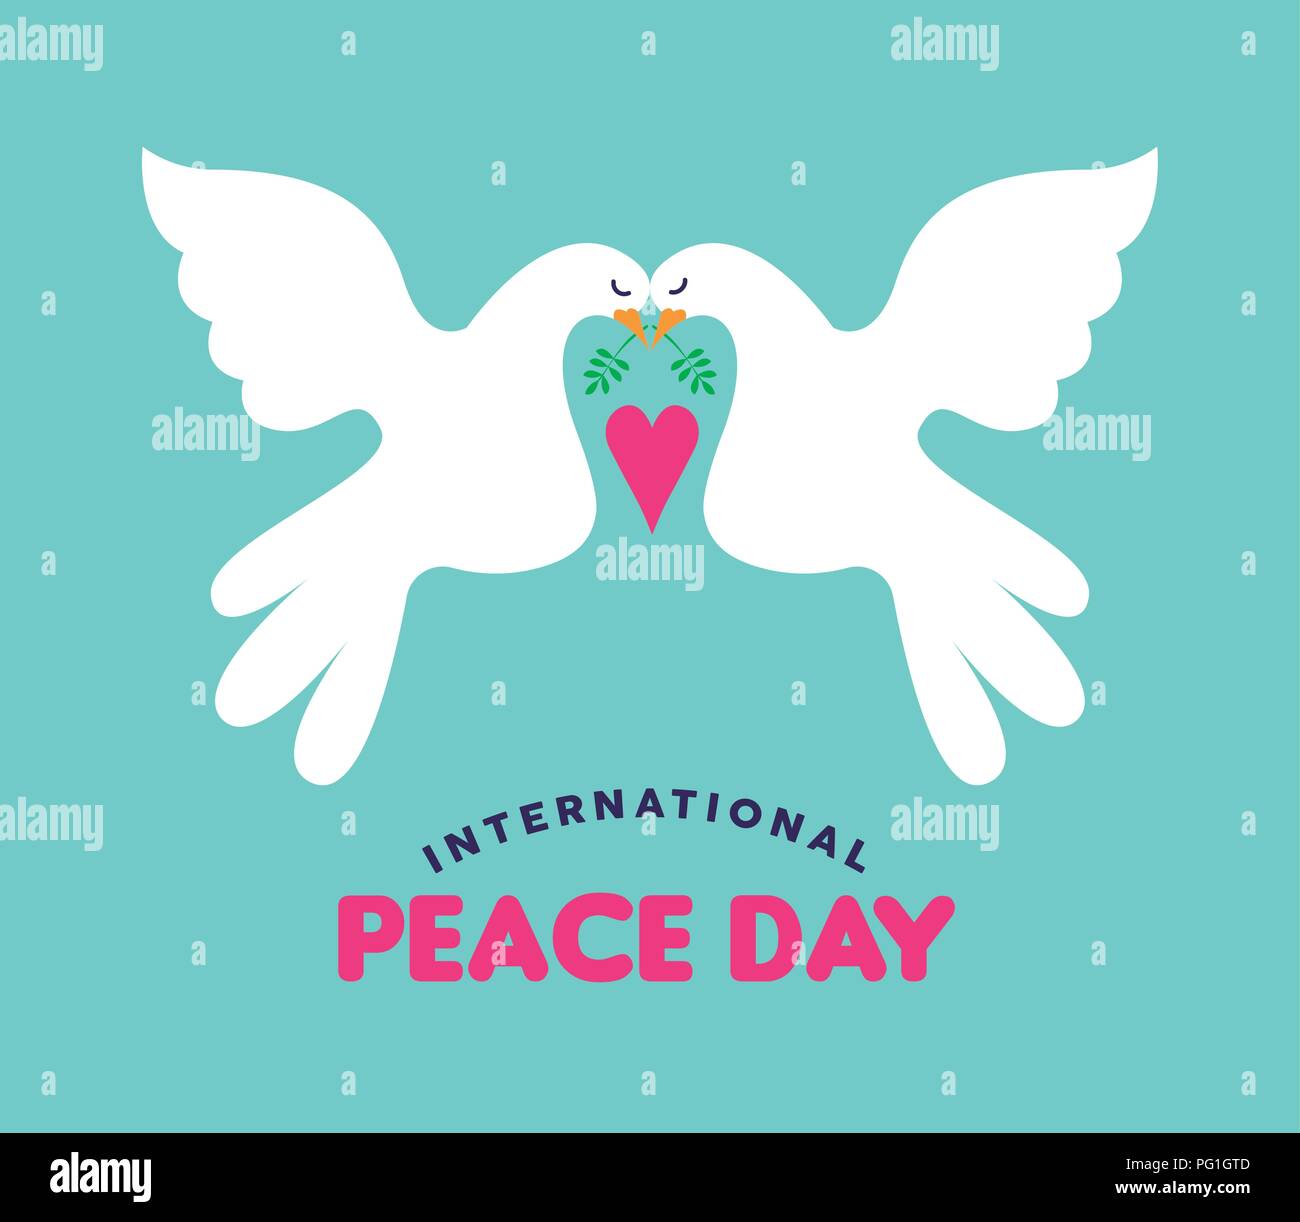 International Peace Day illustration of white doves couple falling in love. Hand drawn style concept design greeting card for global event peaceful ce Stock Vector